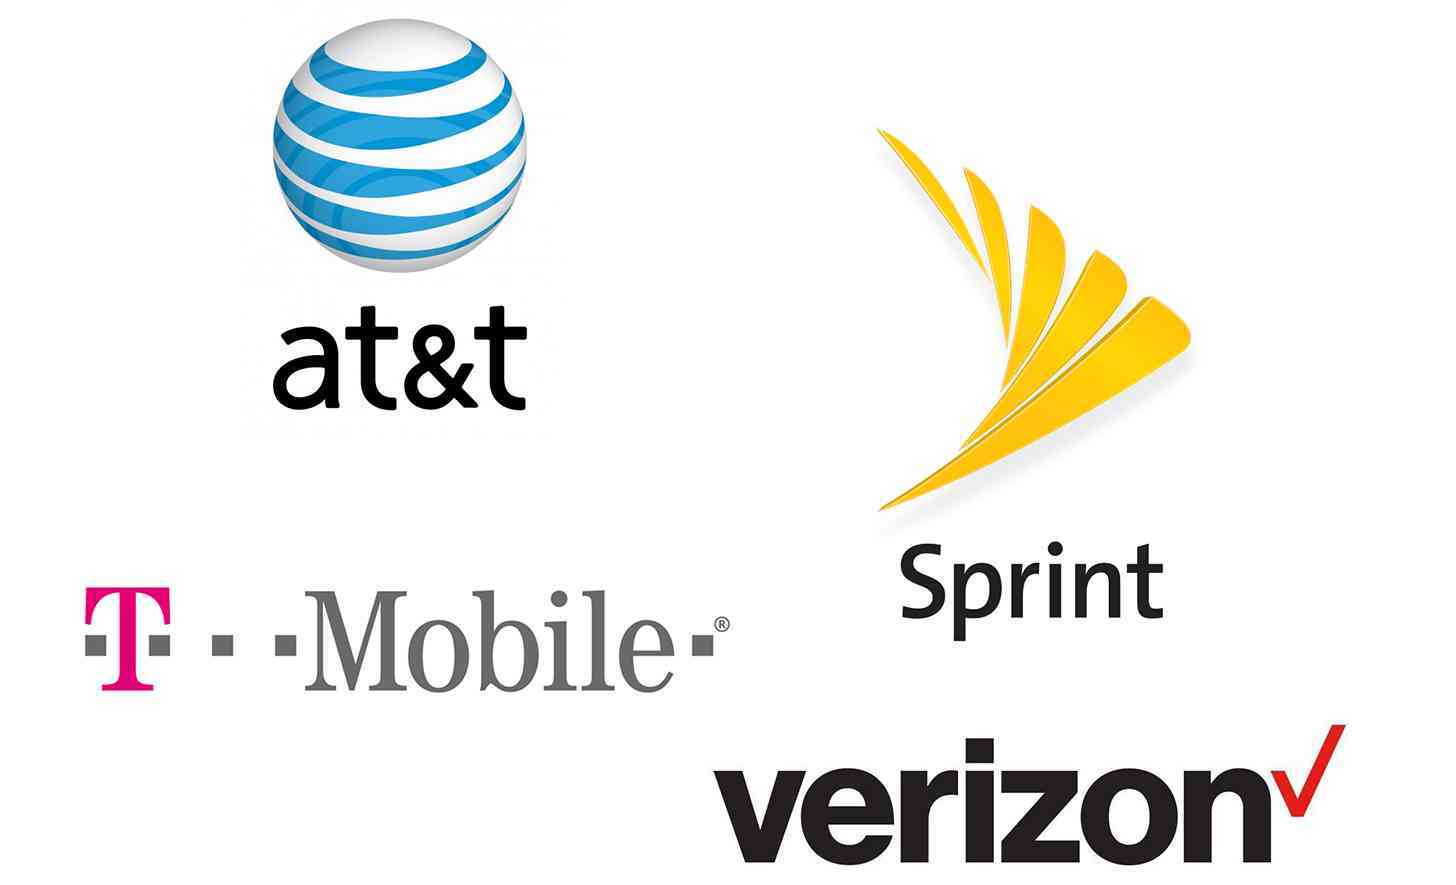 AT&T, Sprint, T-Mobile, and Verizon Wireless logos